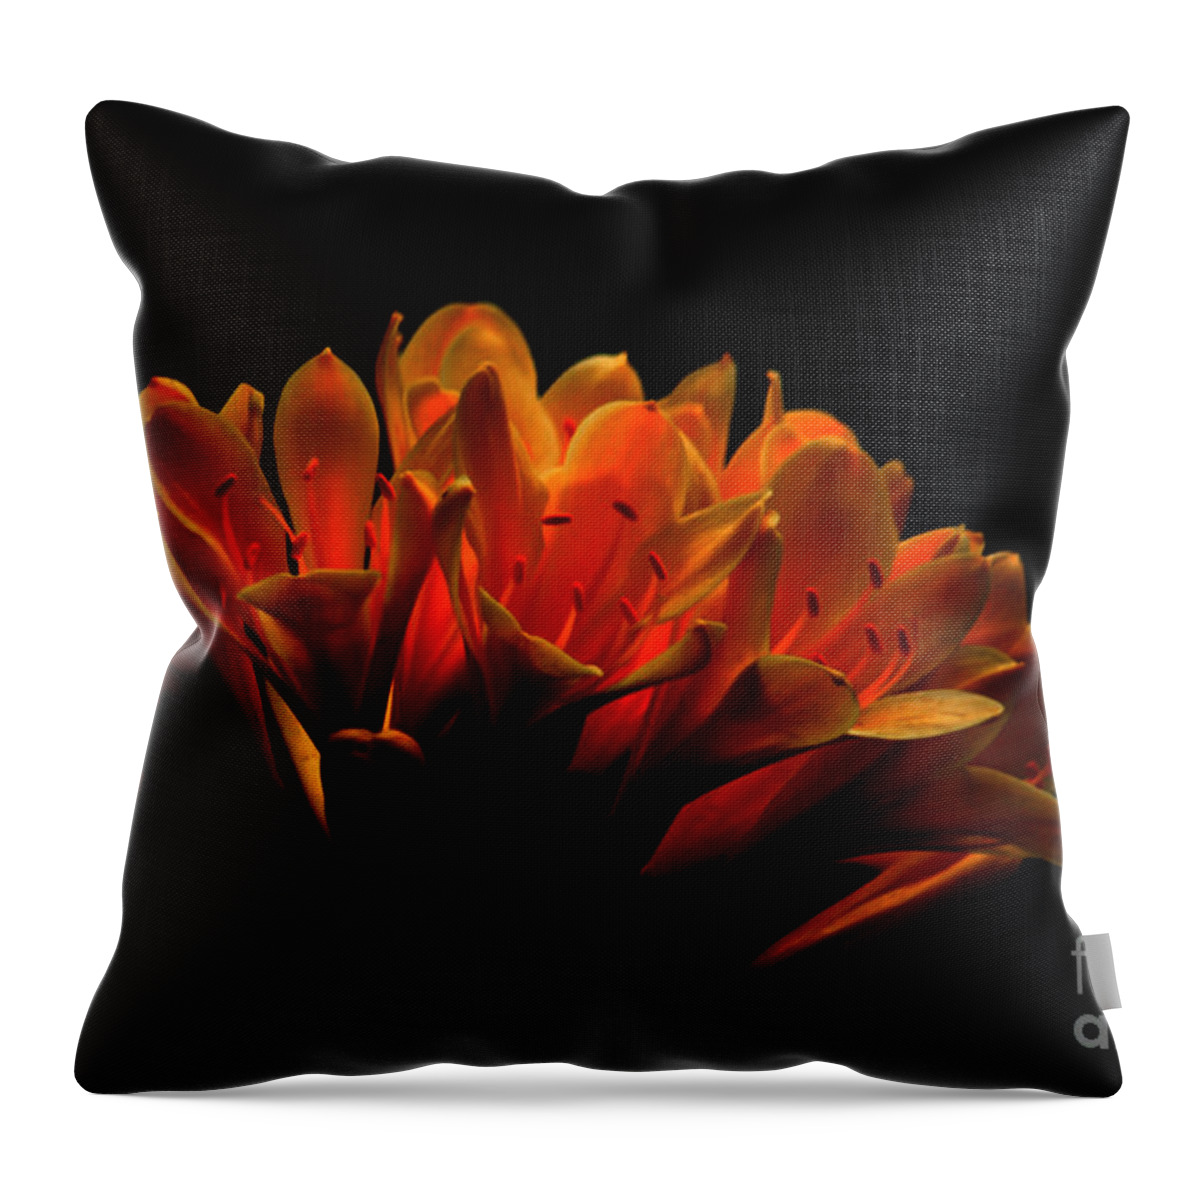 Floral Throw Pillow featuring the photograph Kaffir Lily by James Eddy